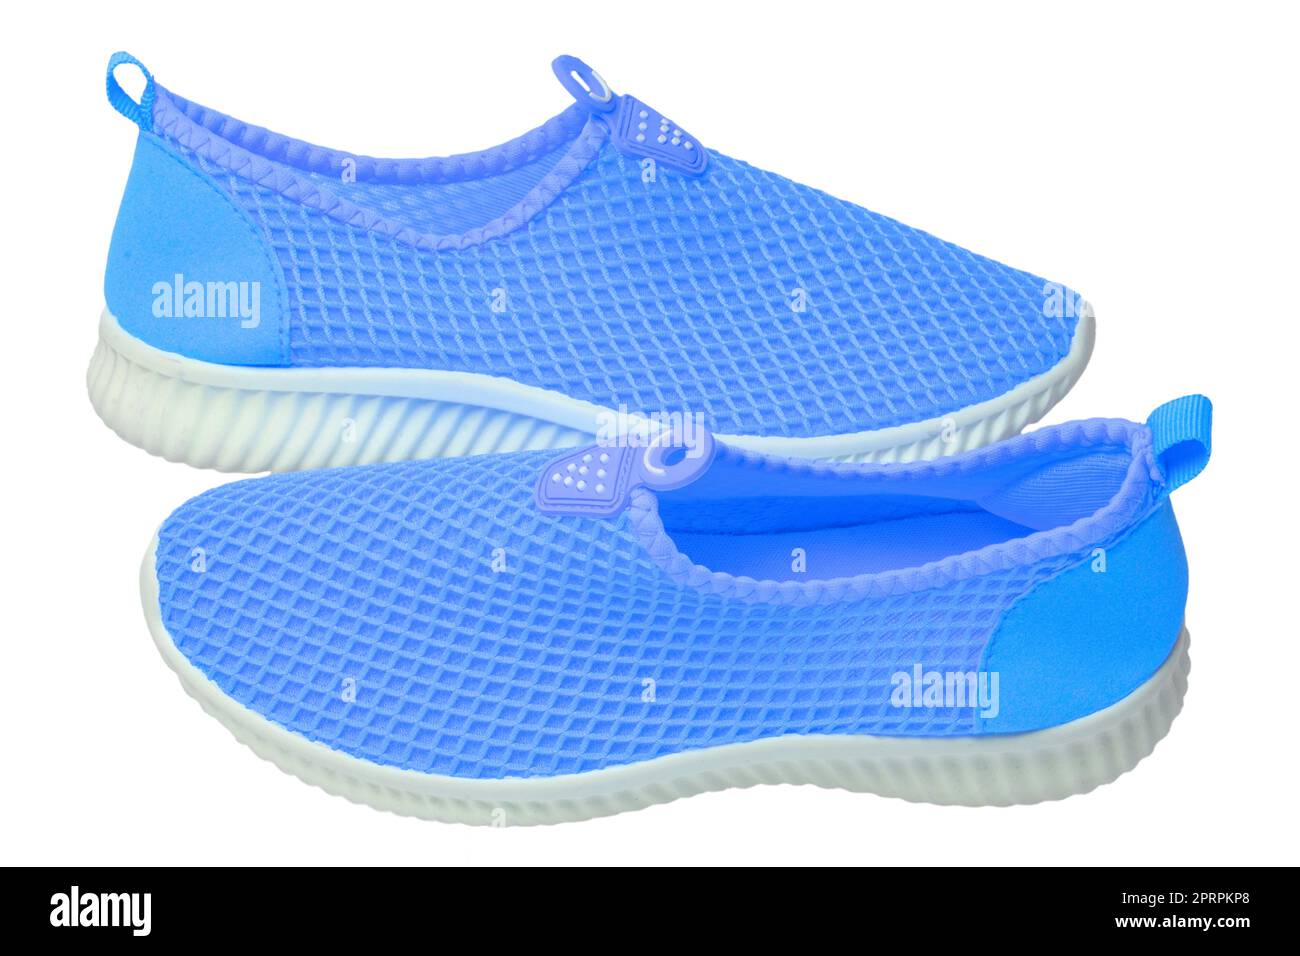 Blue sneaker isolated. Close-up of women's trendy athletic shoes or sport sneakers isolated on a white background. Modern footwear design for workout. Macro. Stock Photo